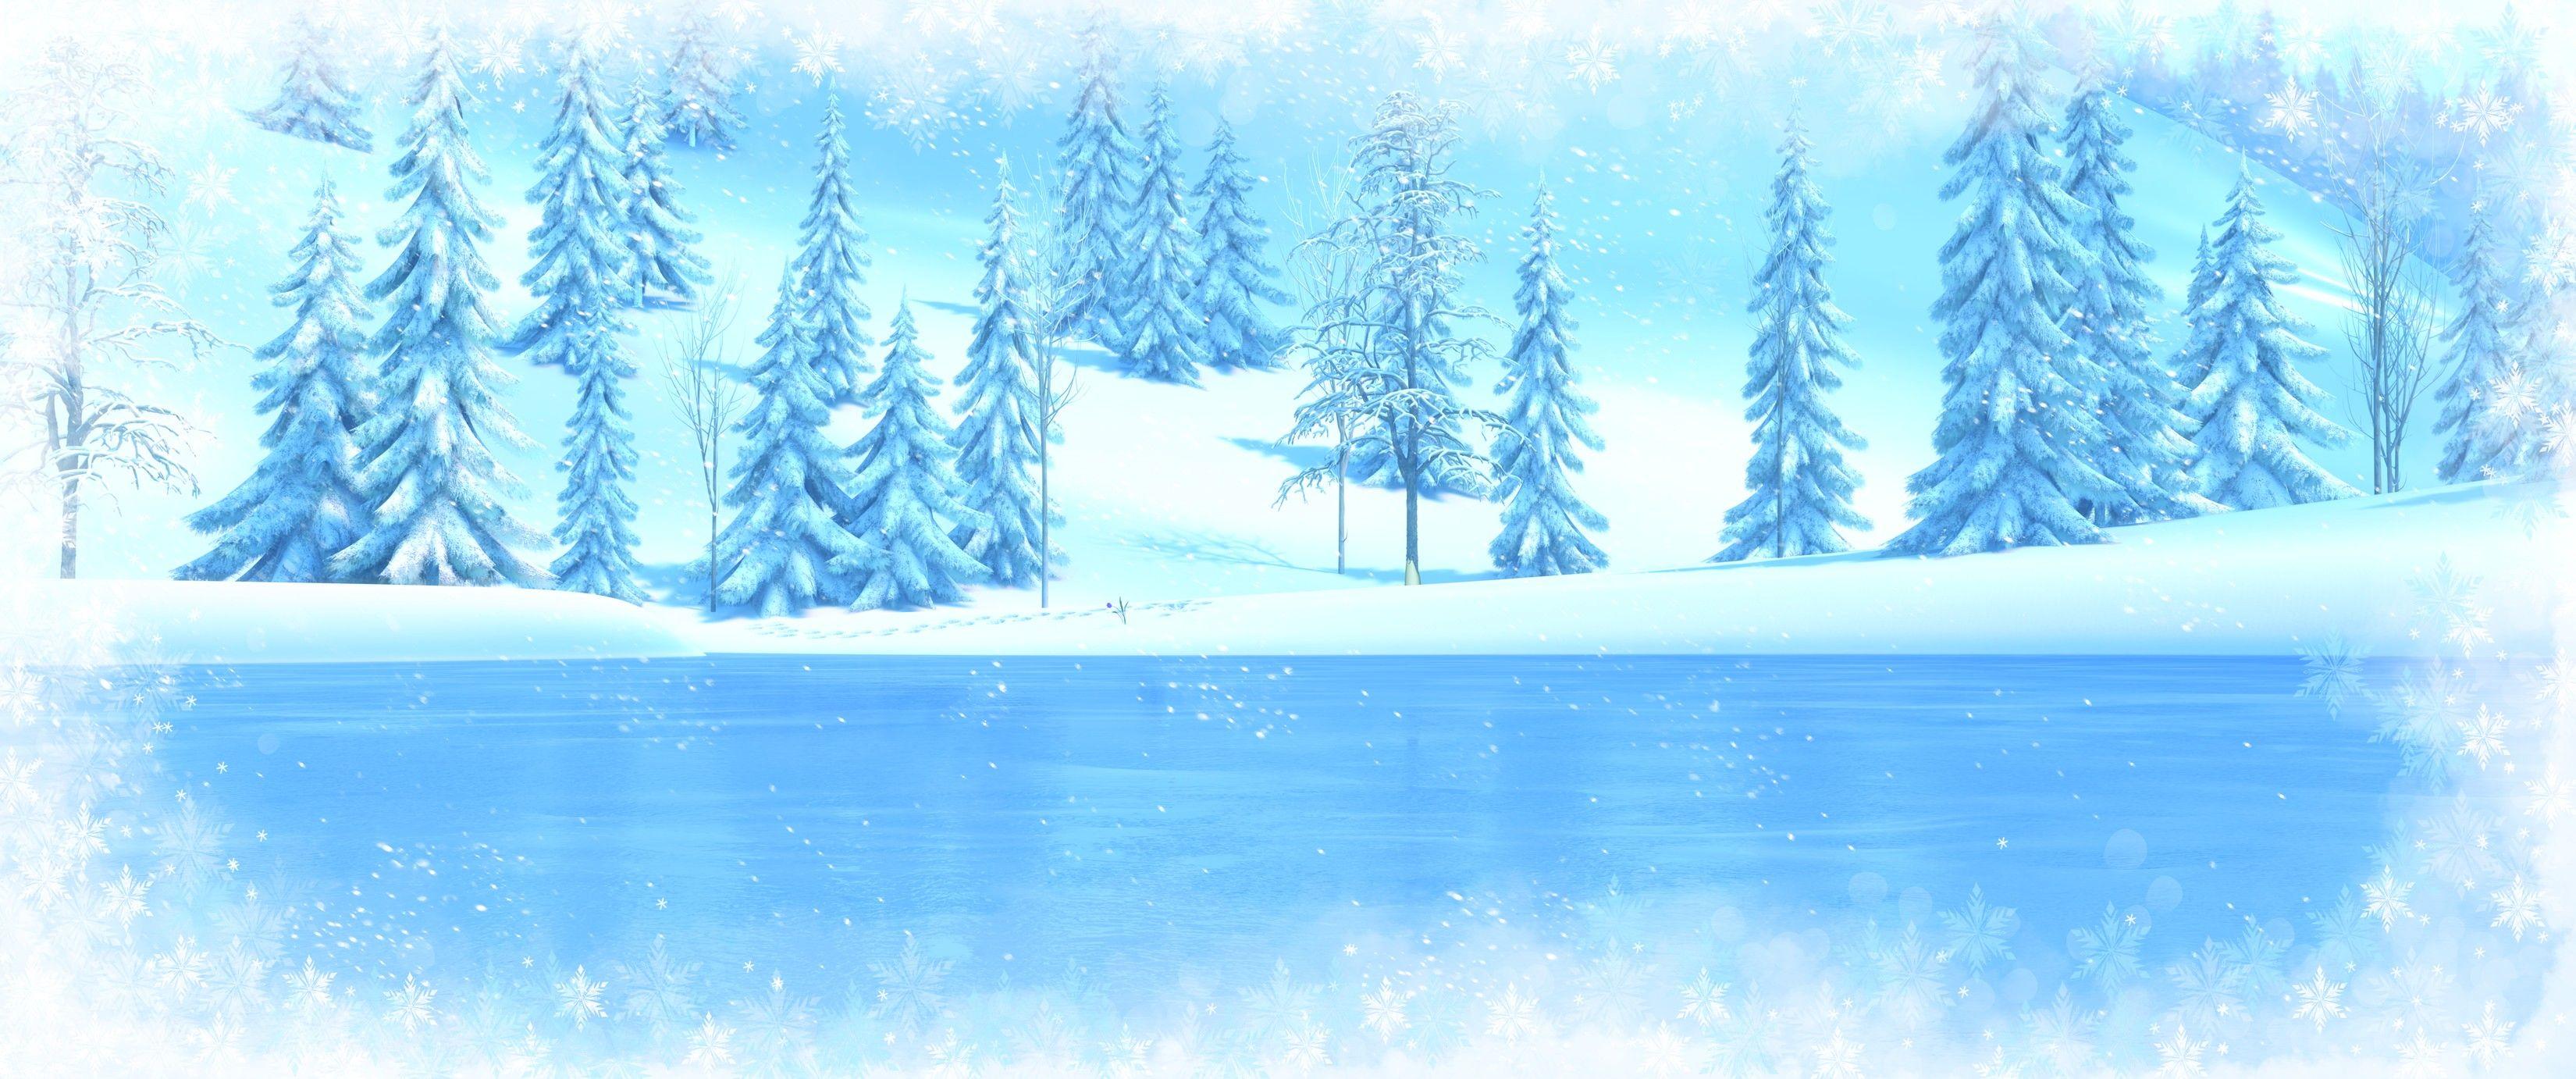 Frozen backgroundDownload free cool High Resolution background